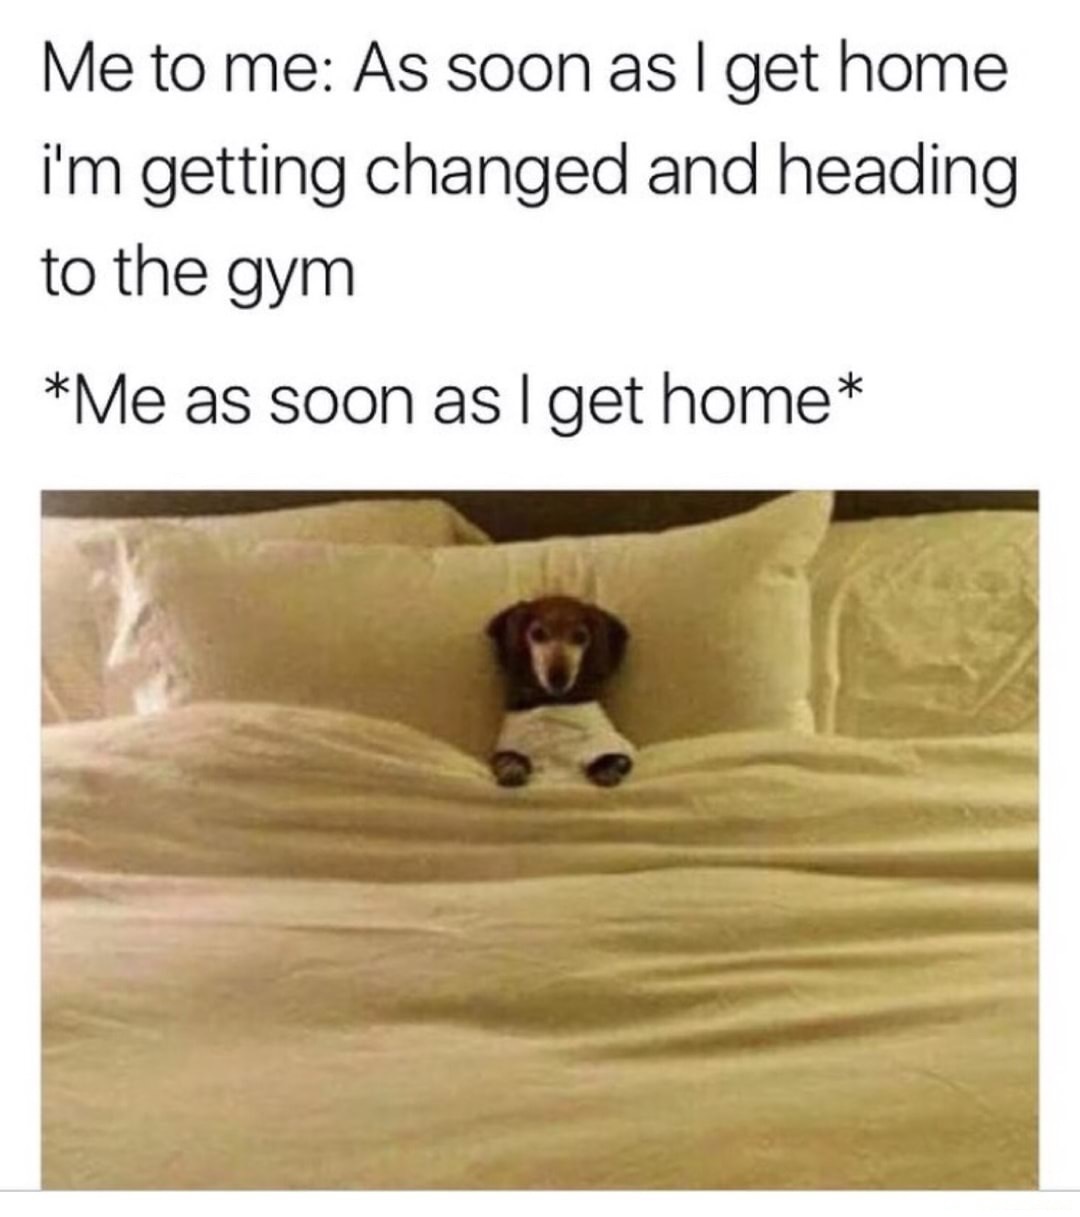 Mem about deciding to change as soon as you get home and heading to the gym, but as soon as you get home you go right into bed.